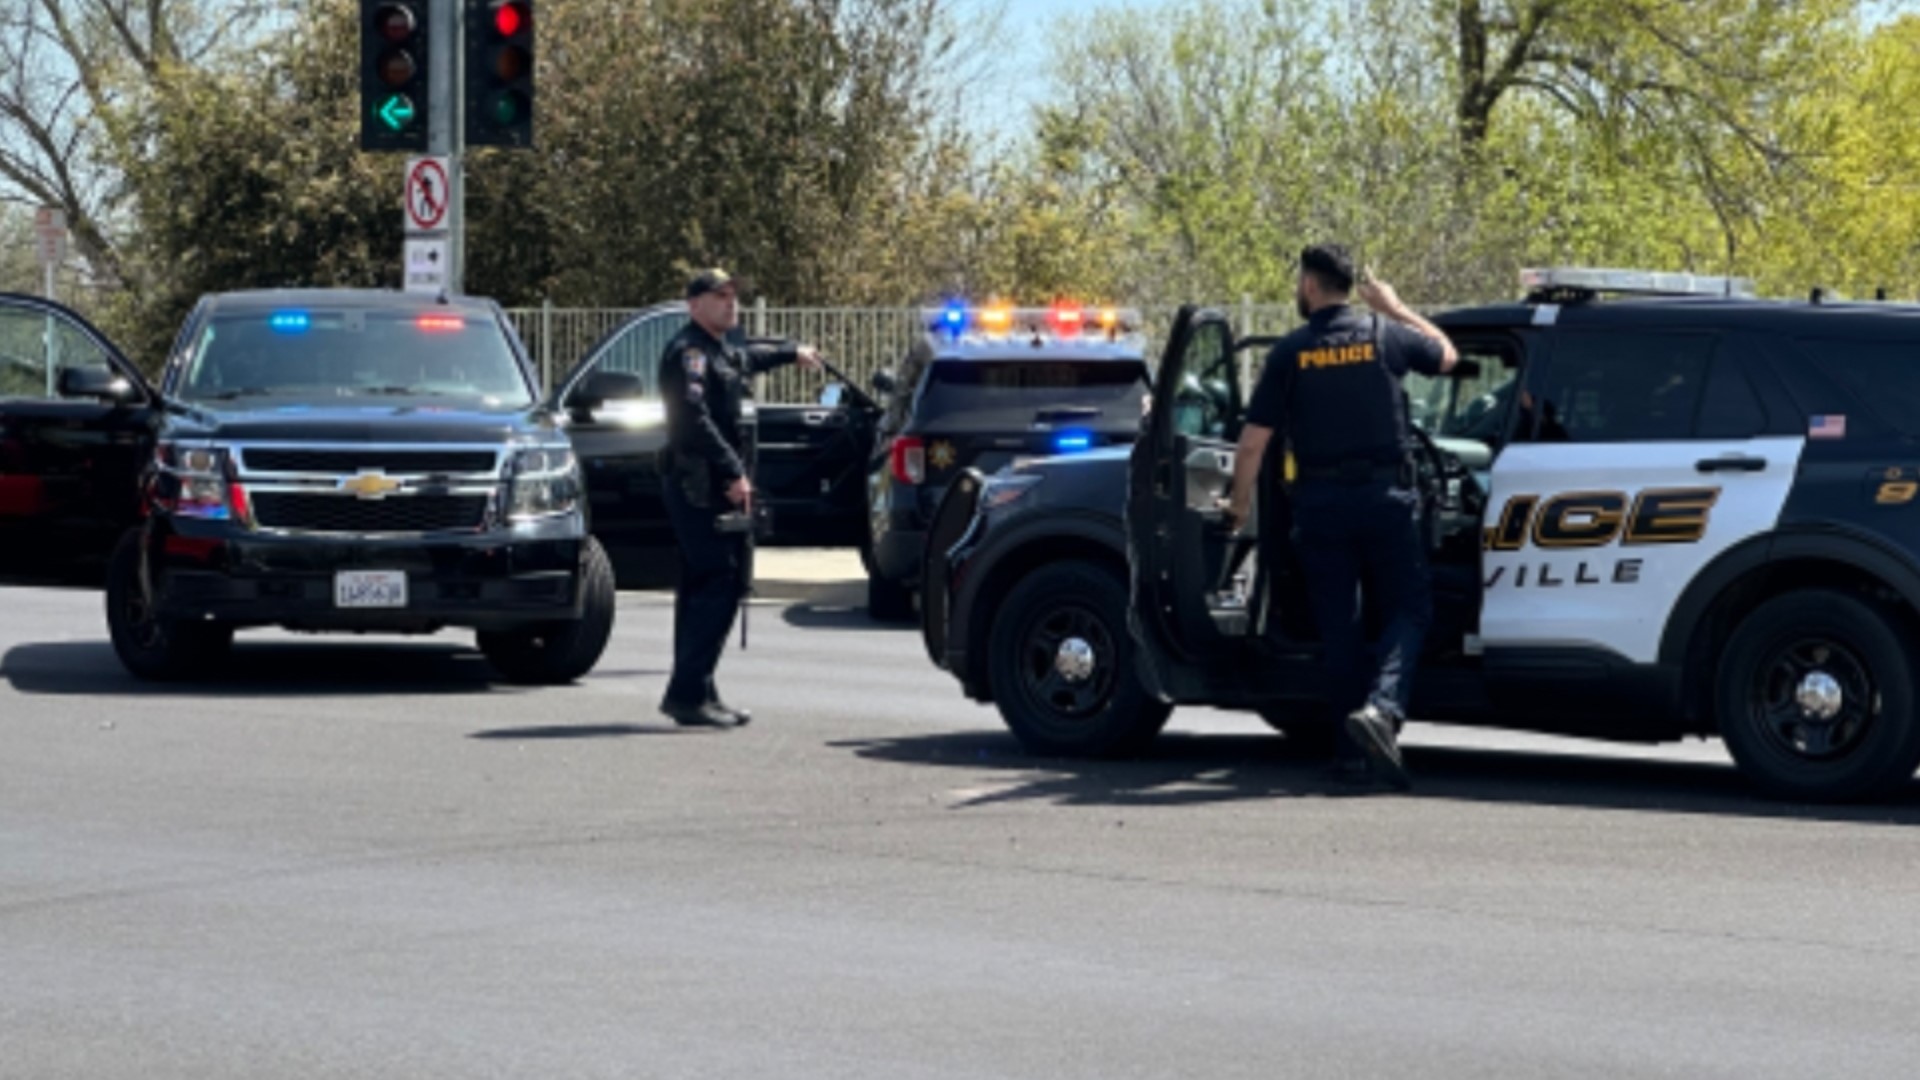 Roseville police said in a Thursday news conference they are unsure if the two hostages knew the suspected shooter, but they do not believe so.